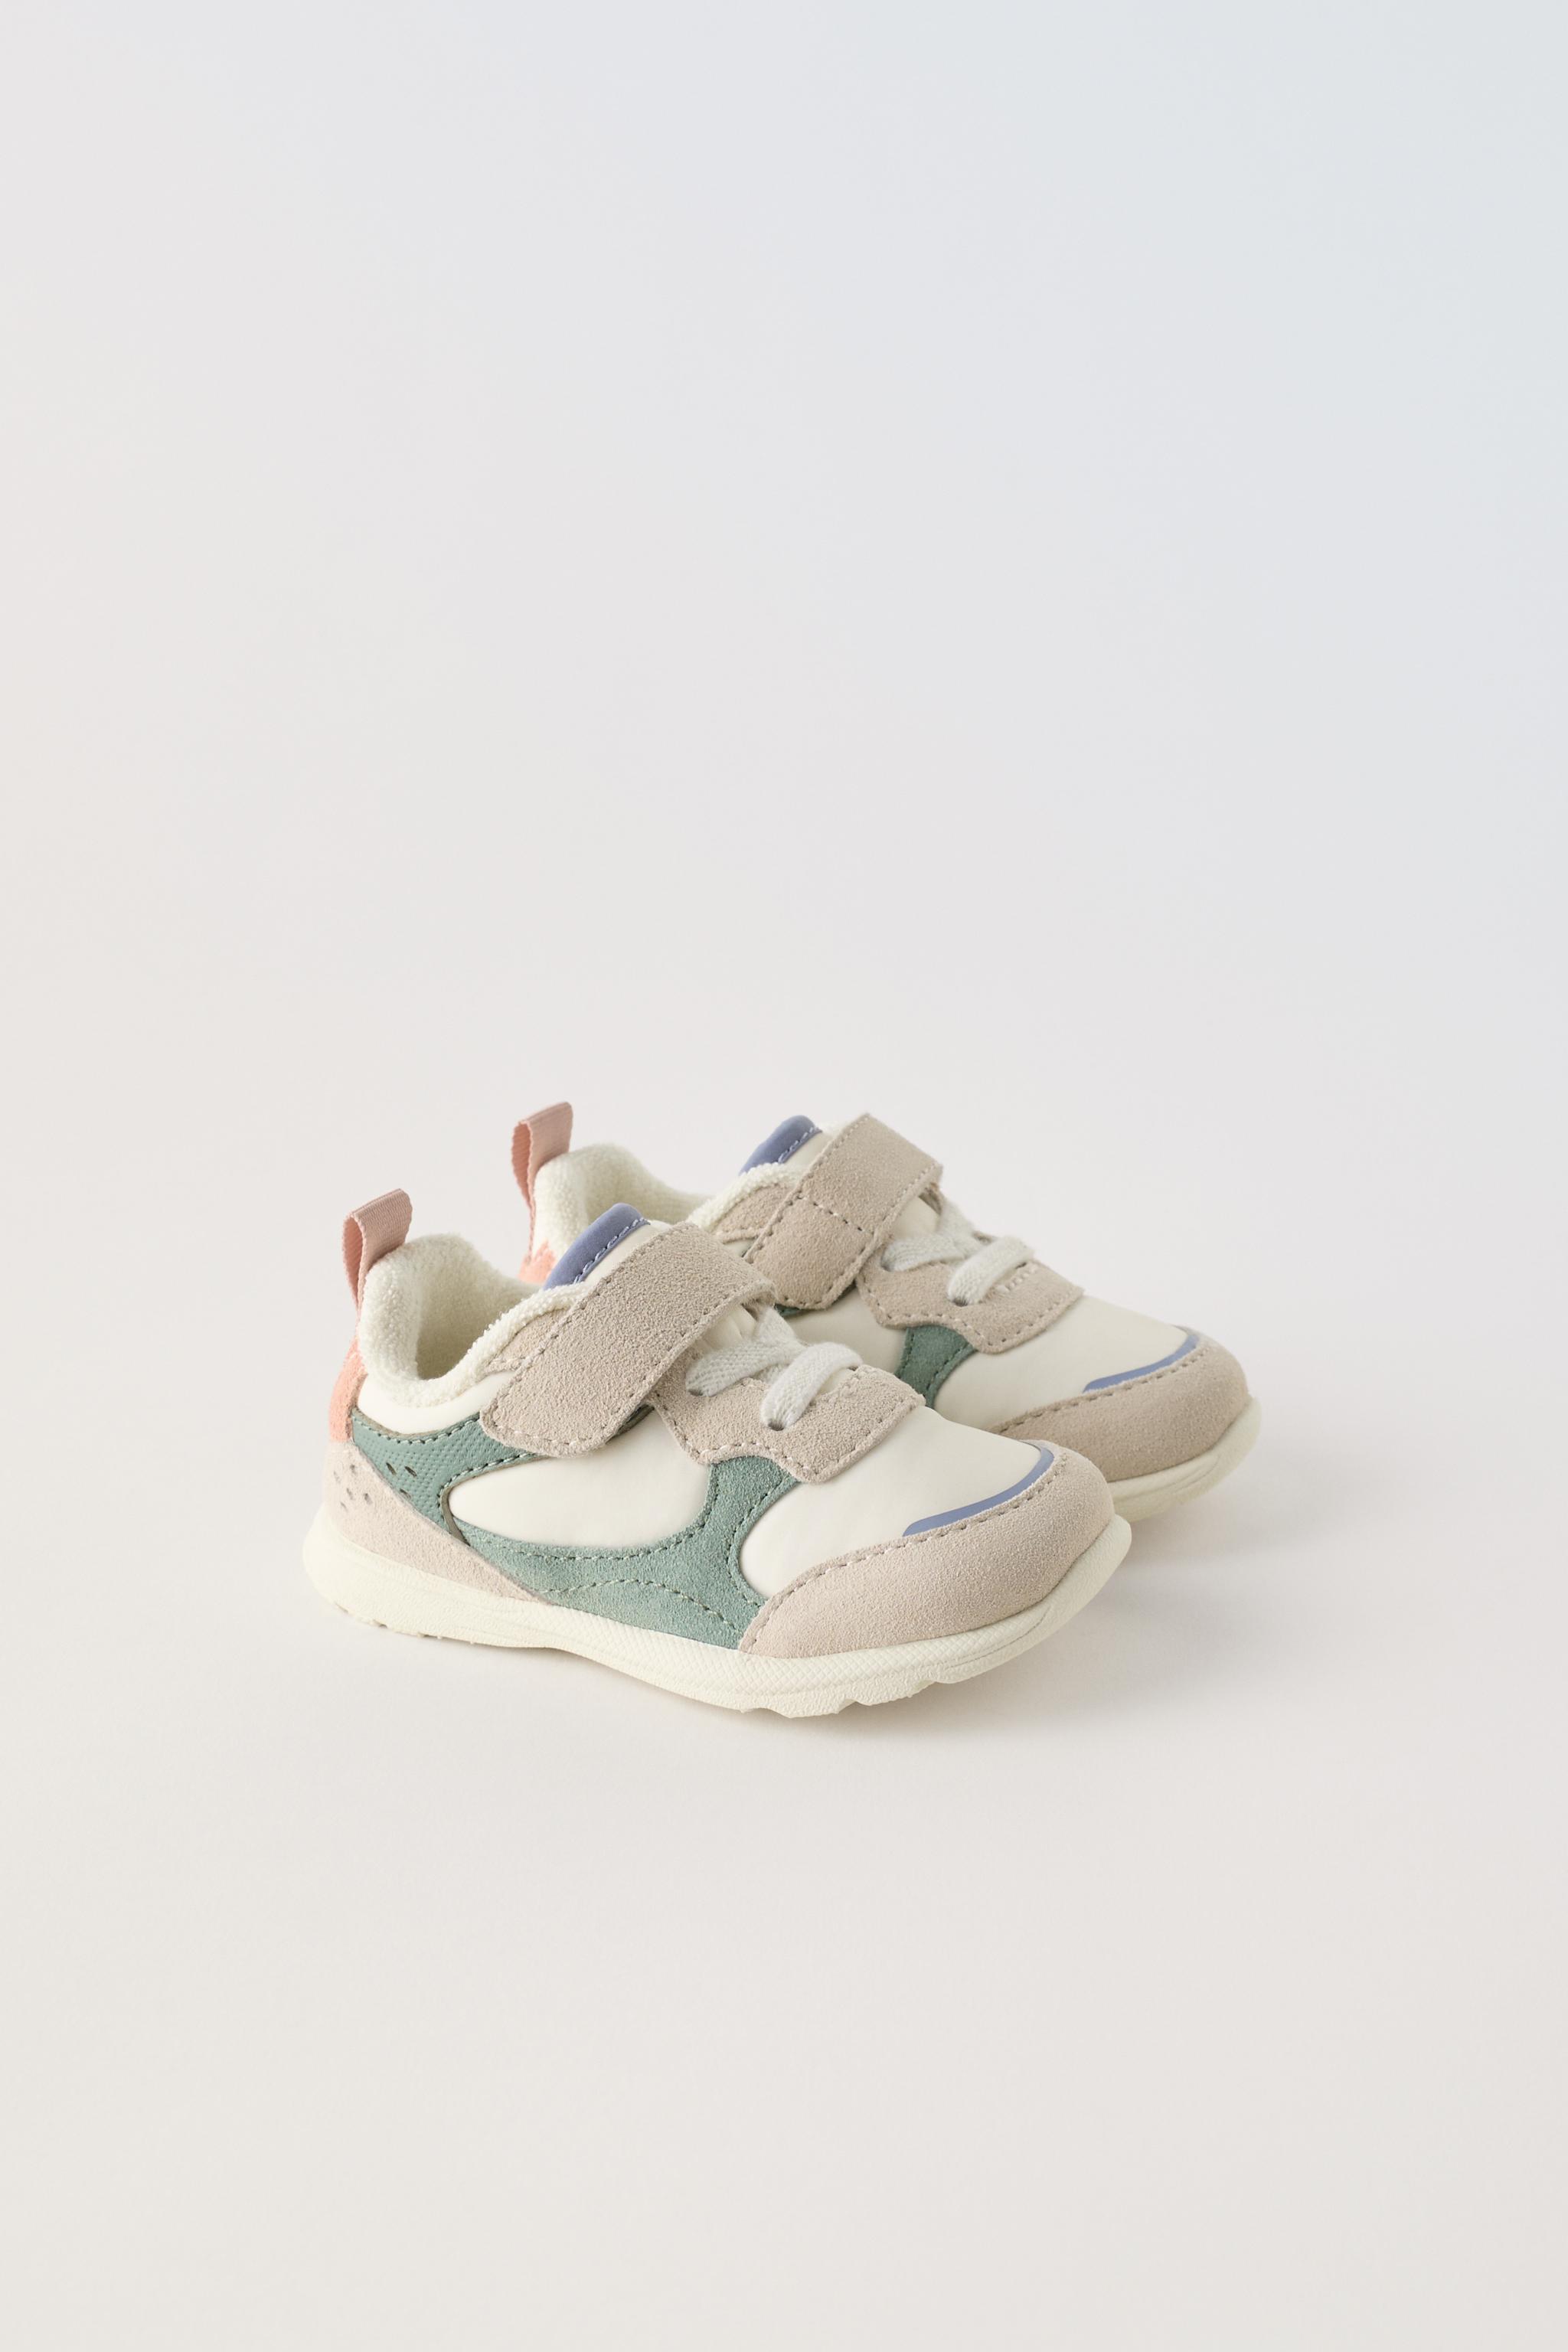 MULTI-PIECE LEATHER SNEAKERS - Green | ZARA United States